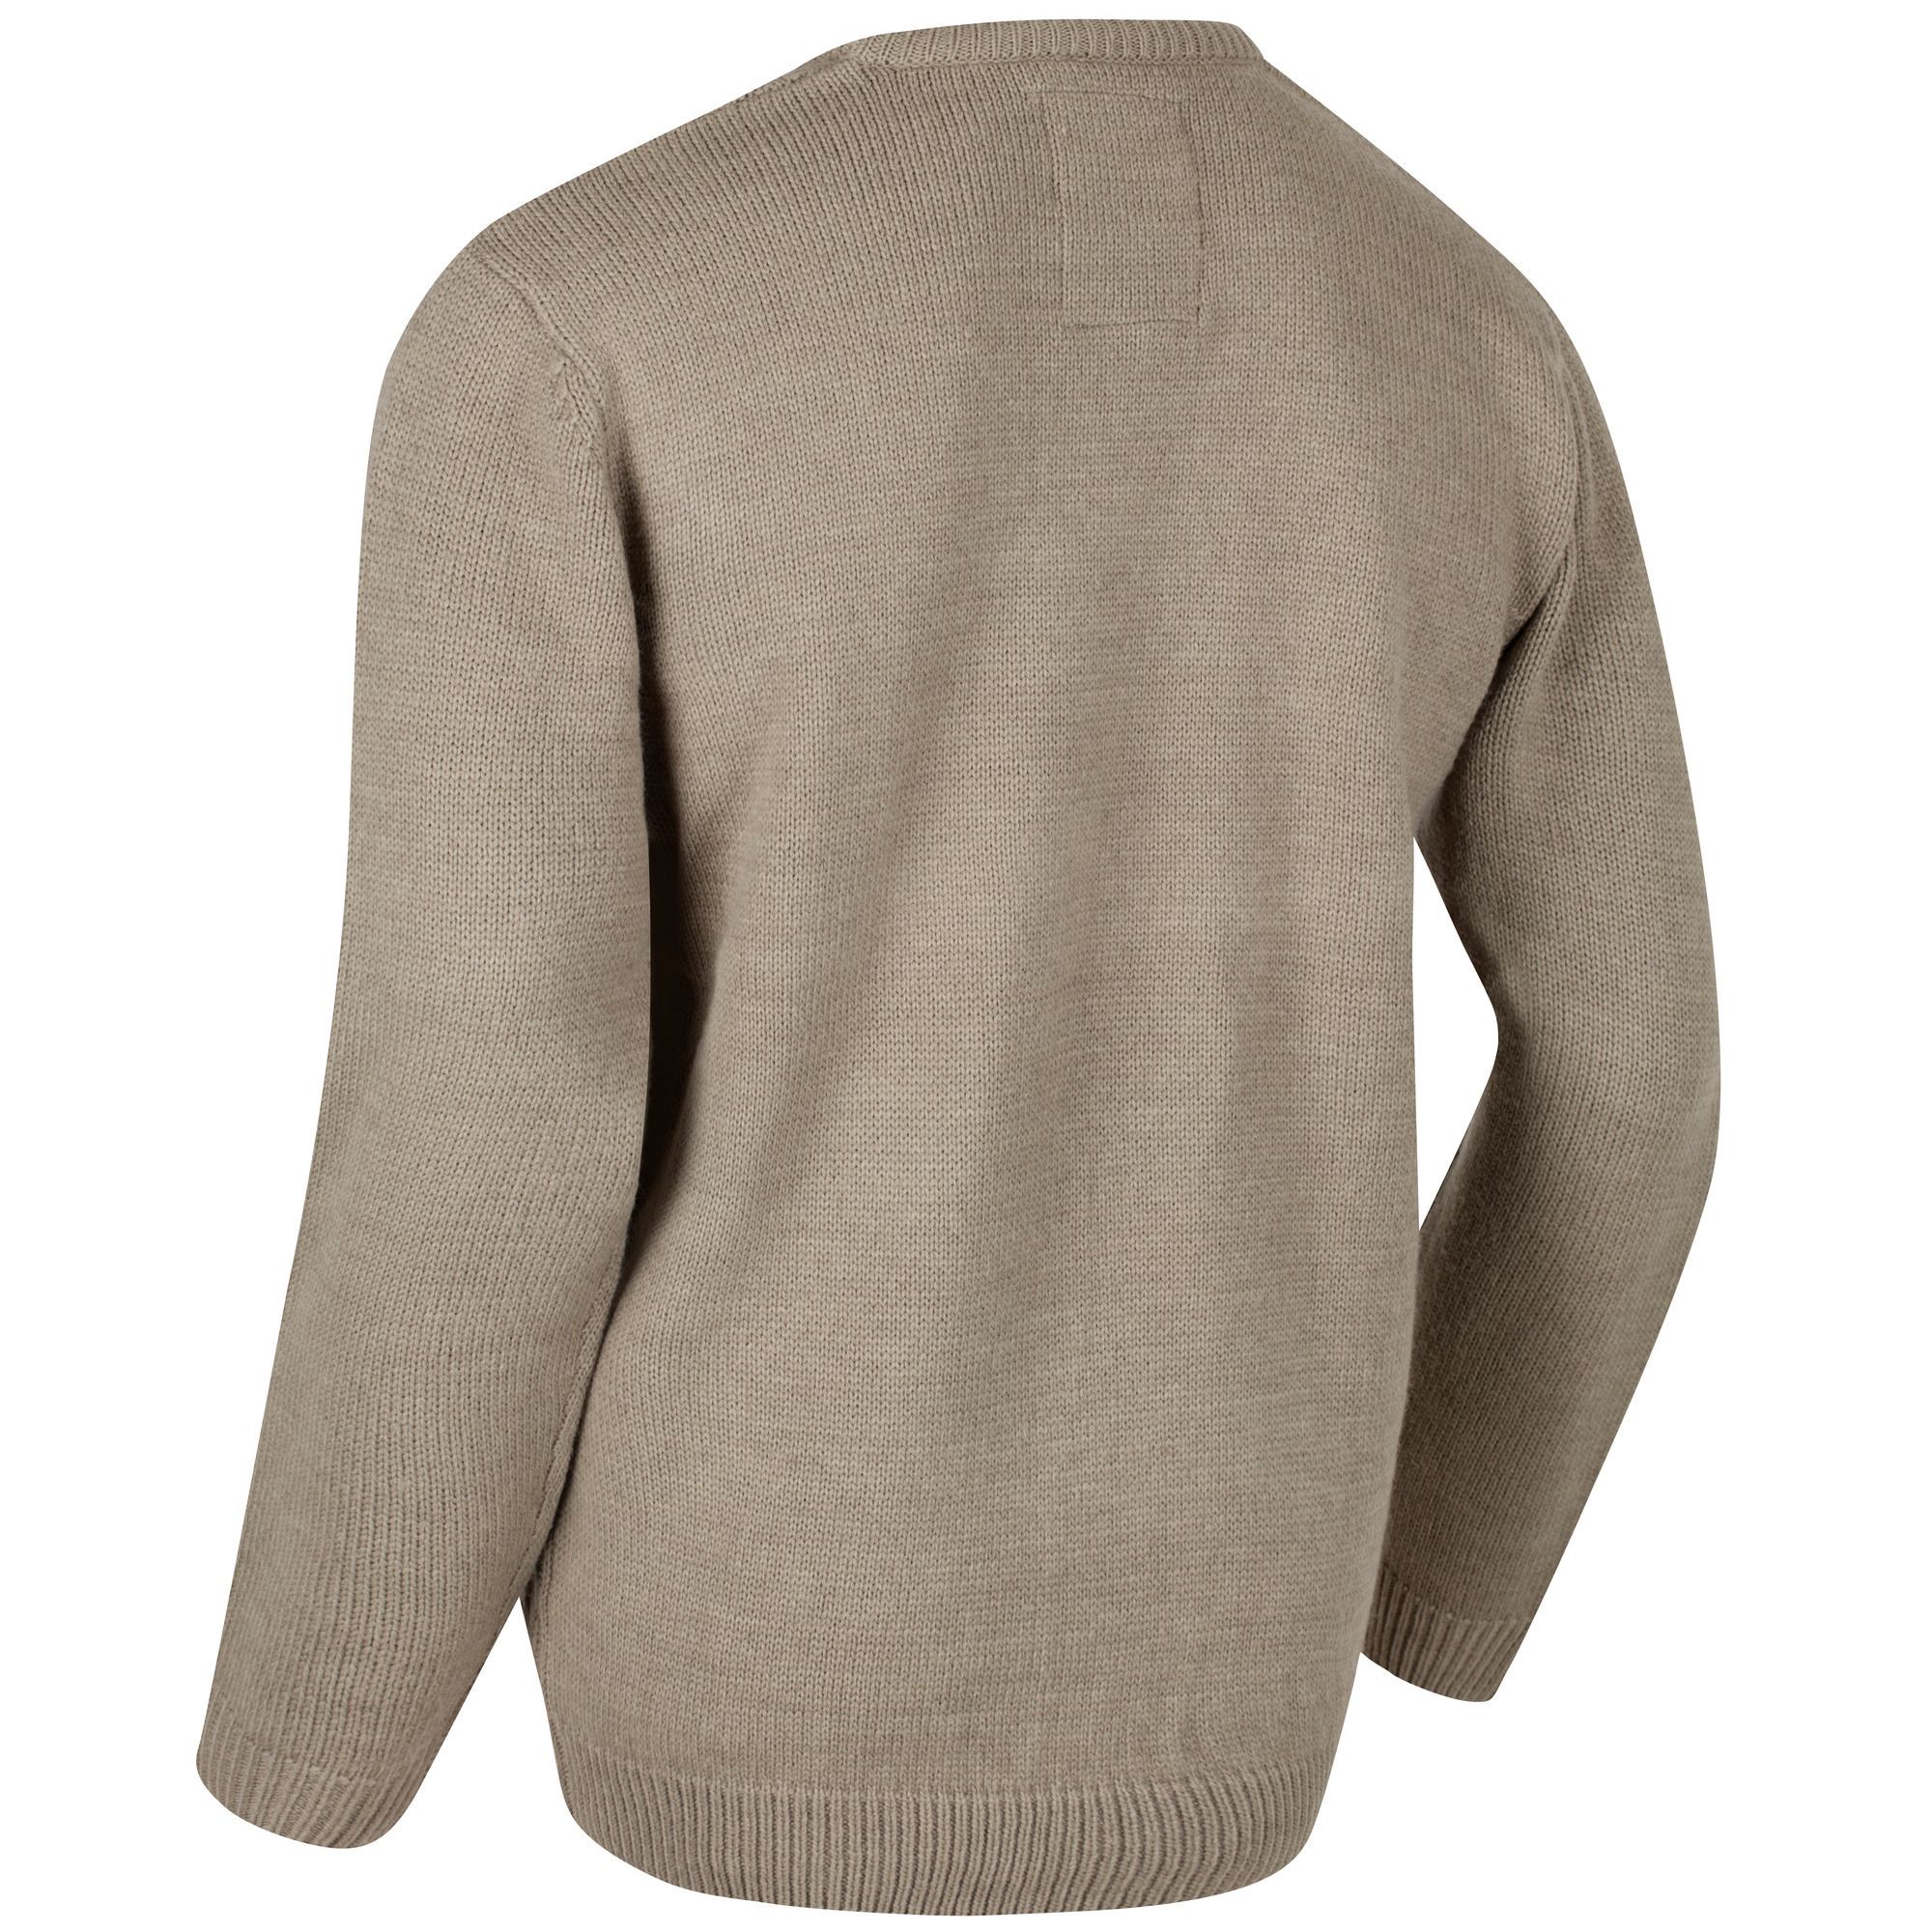 Classic crew neck jumper with a cable knit front for added insulation and durability. 85% acrylic. 15% wool. 5gg knit.